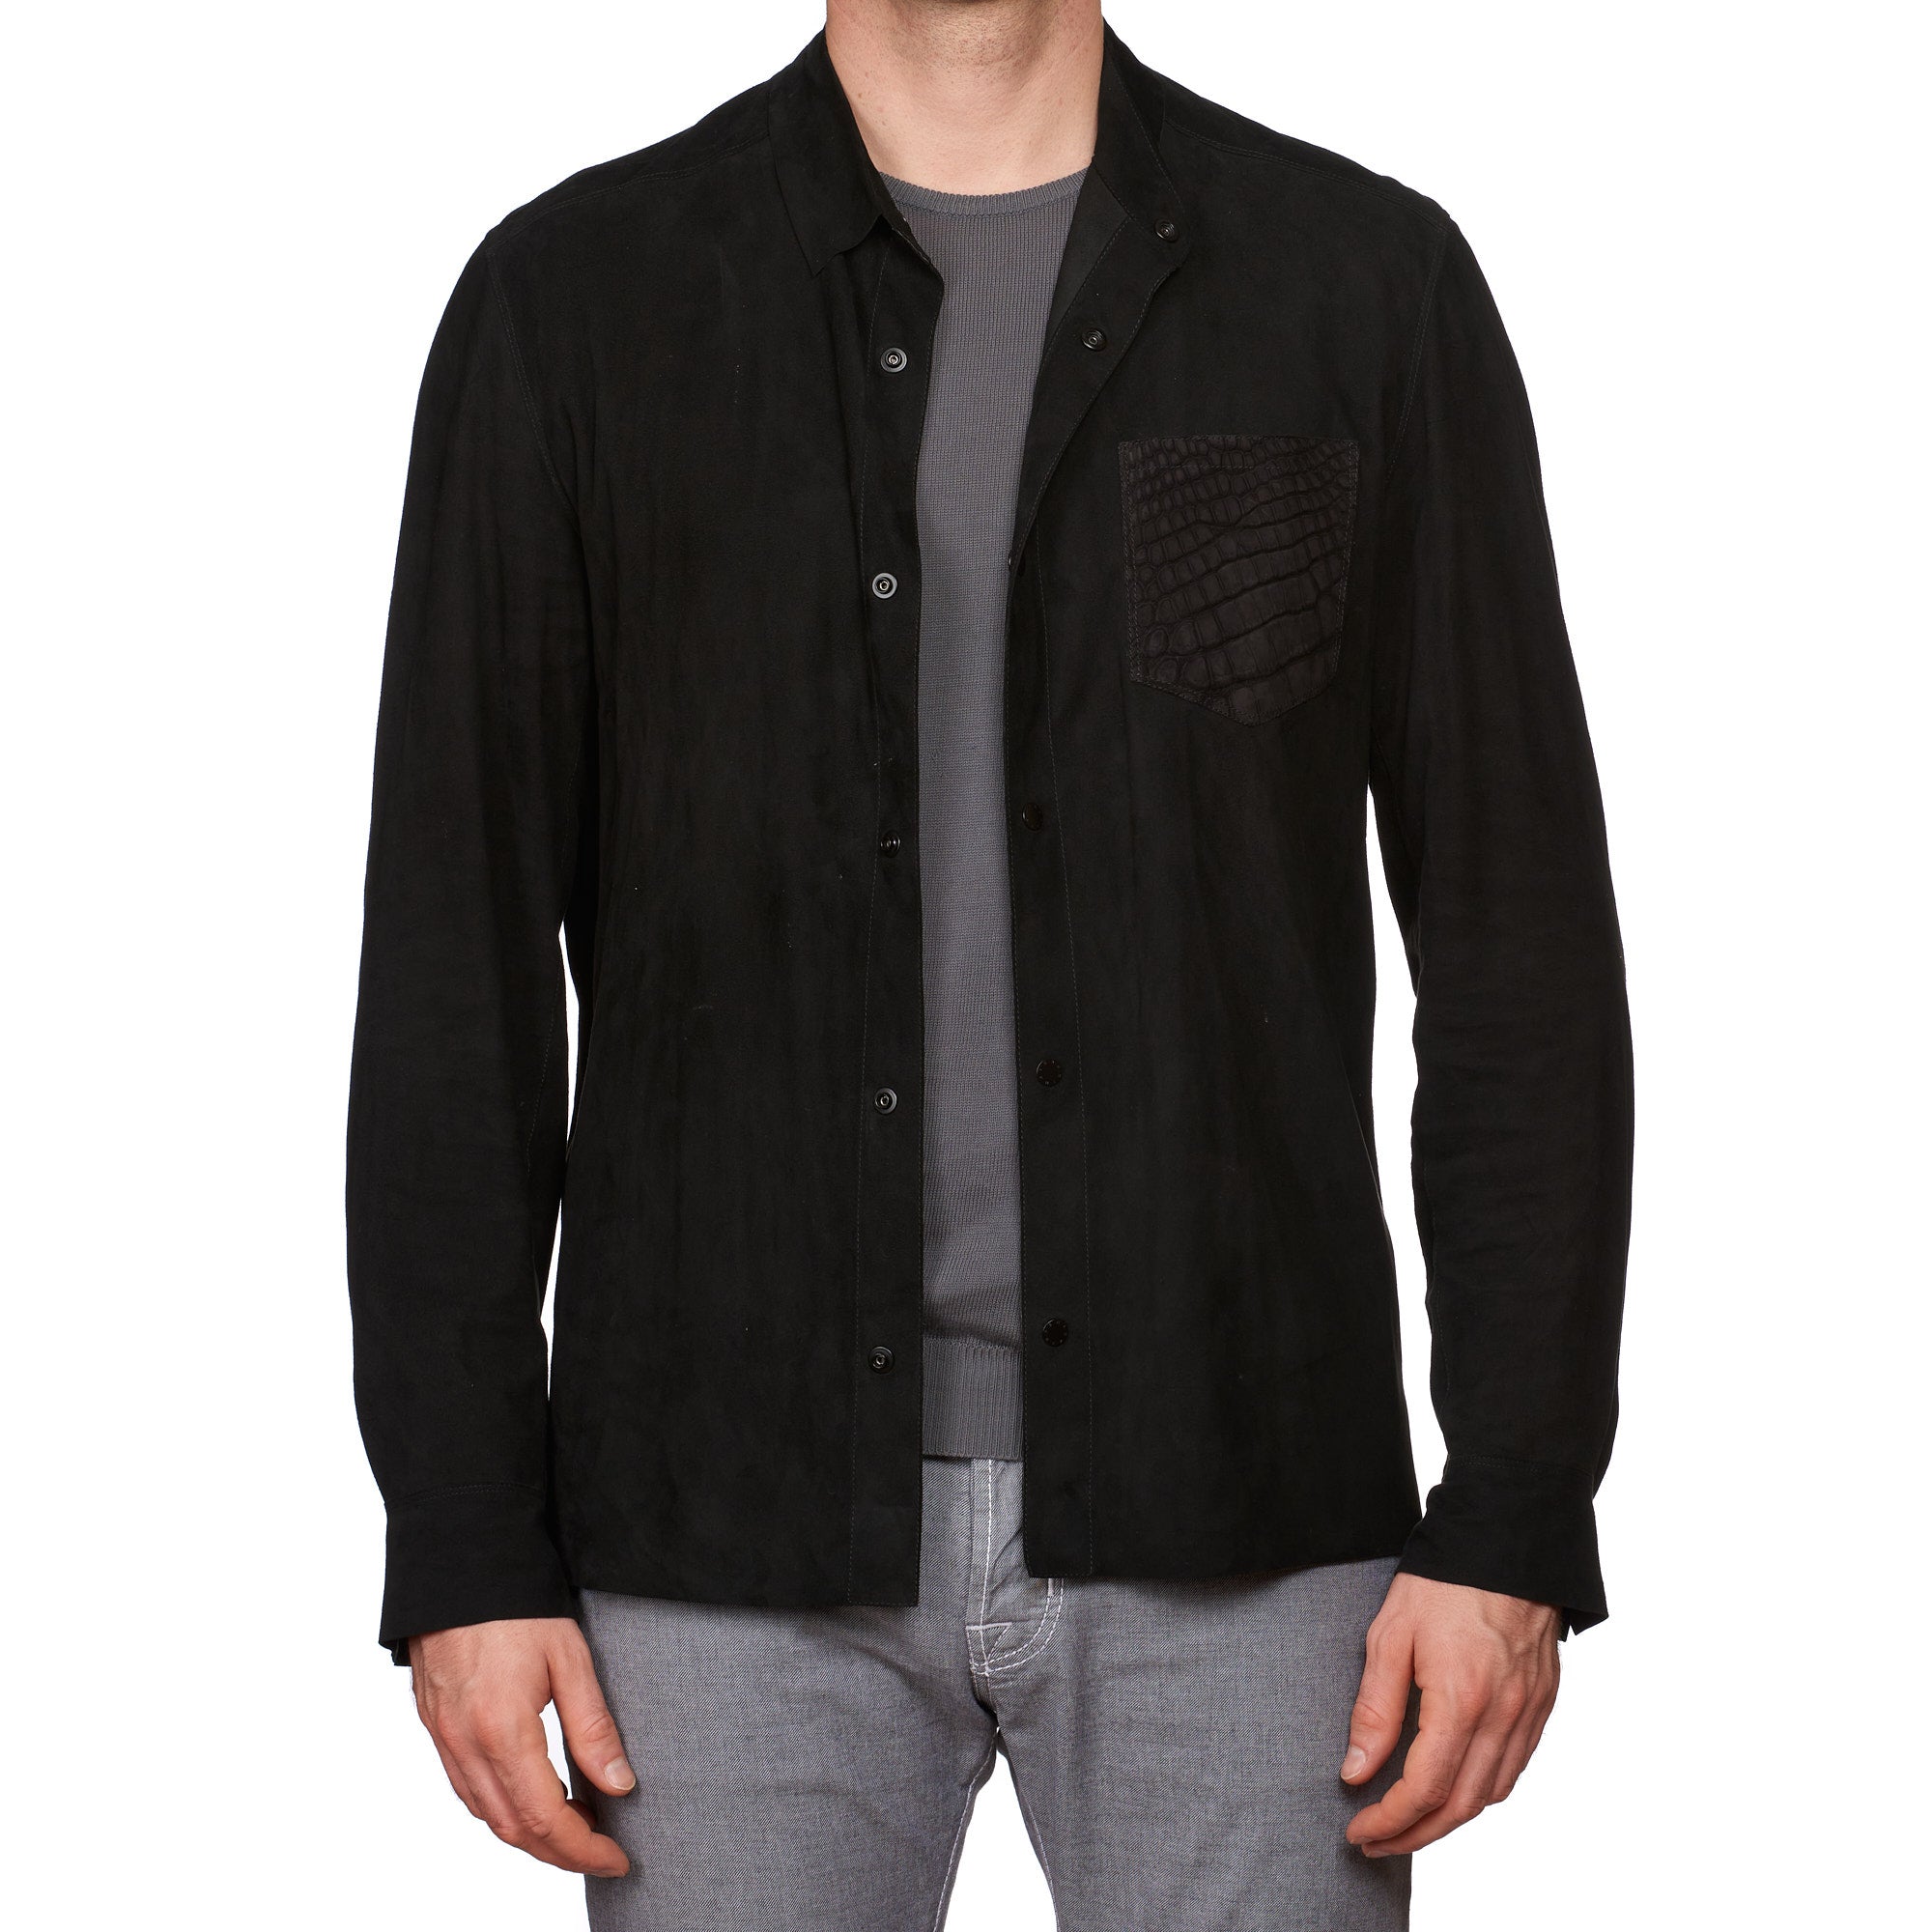 SERAPHIN Black Goat Suede Leather Shirt Jacket with Crocodile Pocket FR 50 US M NEW SERAPHIN